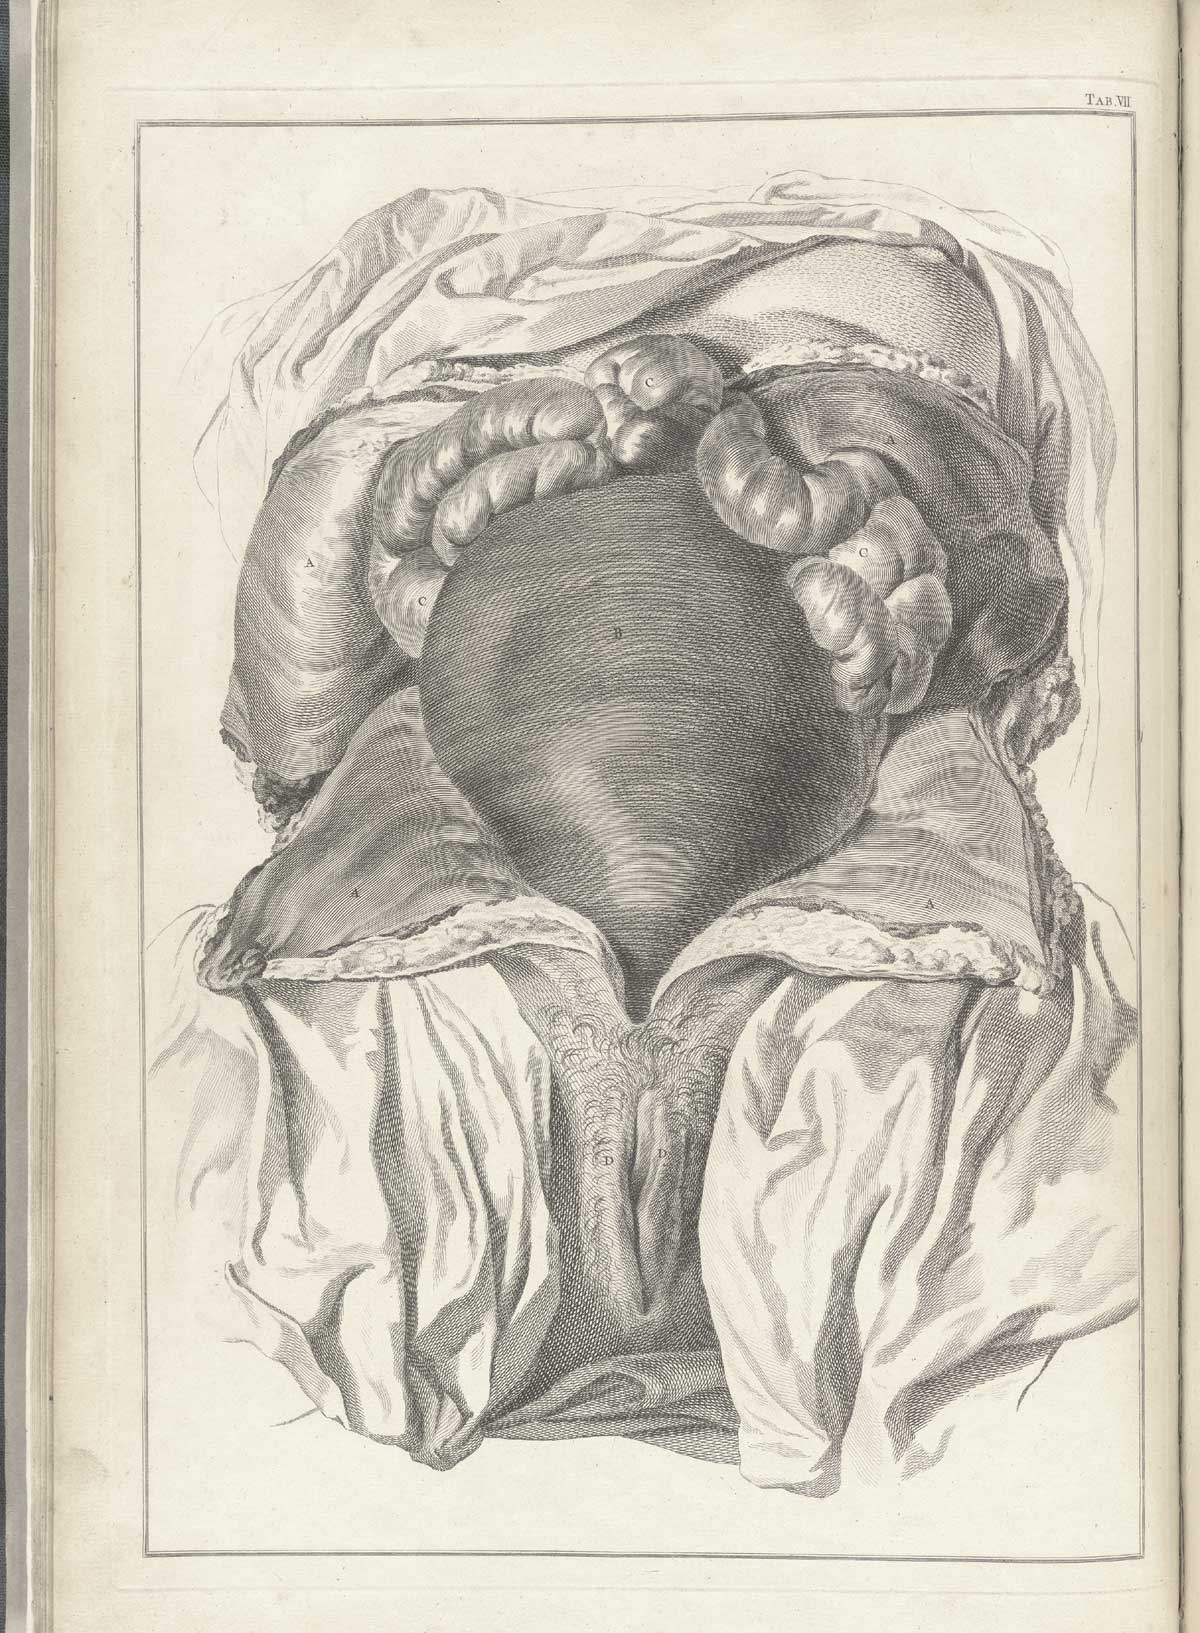 Table 7 of William Smellie's A sett of anatomical tables, with explanations, and an abridgment, of the practice of midwifery, featuring the illustrated drawing of a pregnant woman's uterus.